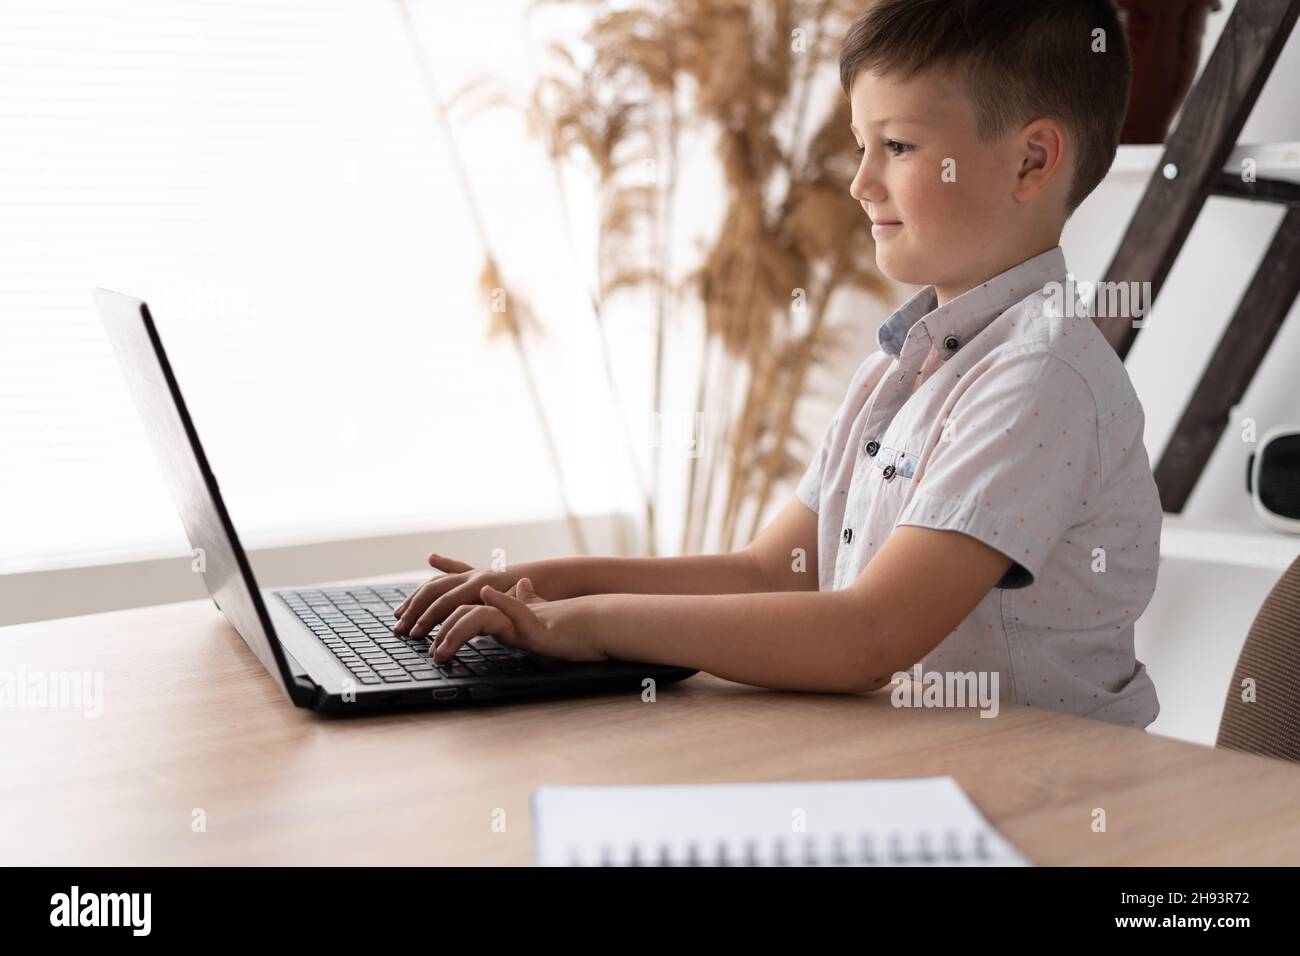 Side view of a schoolboy at home schooled working on a laptop typing text on the keyboard while communicating with a remote teacher. The child is Stock Photo